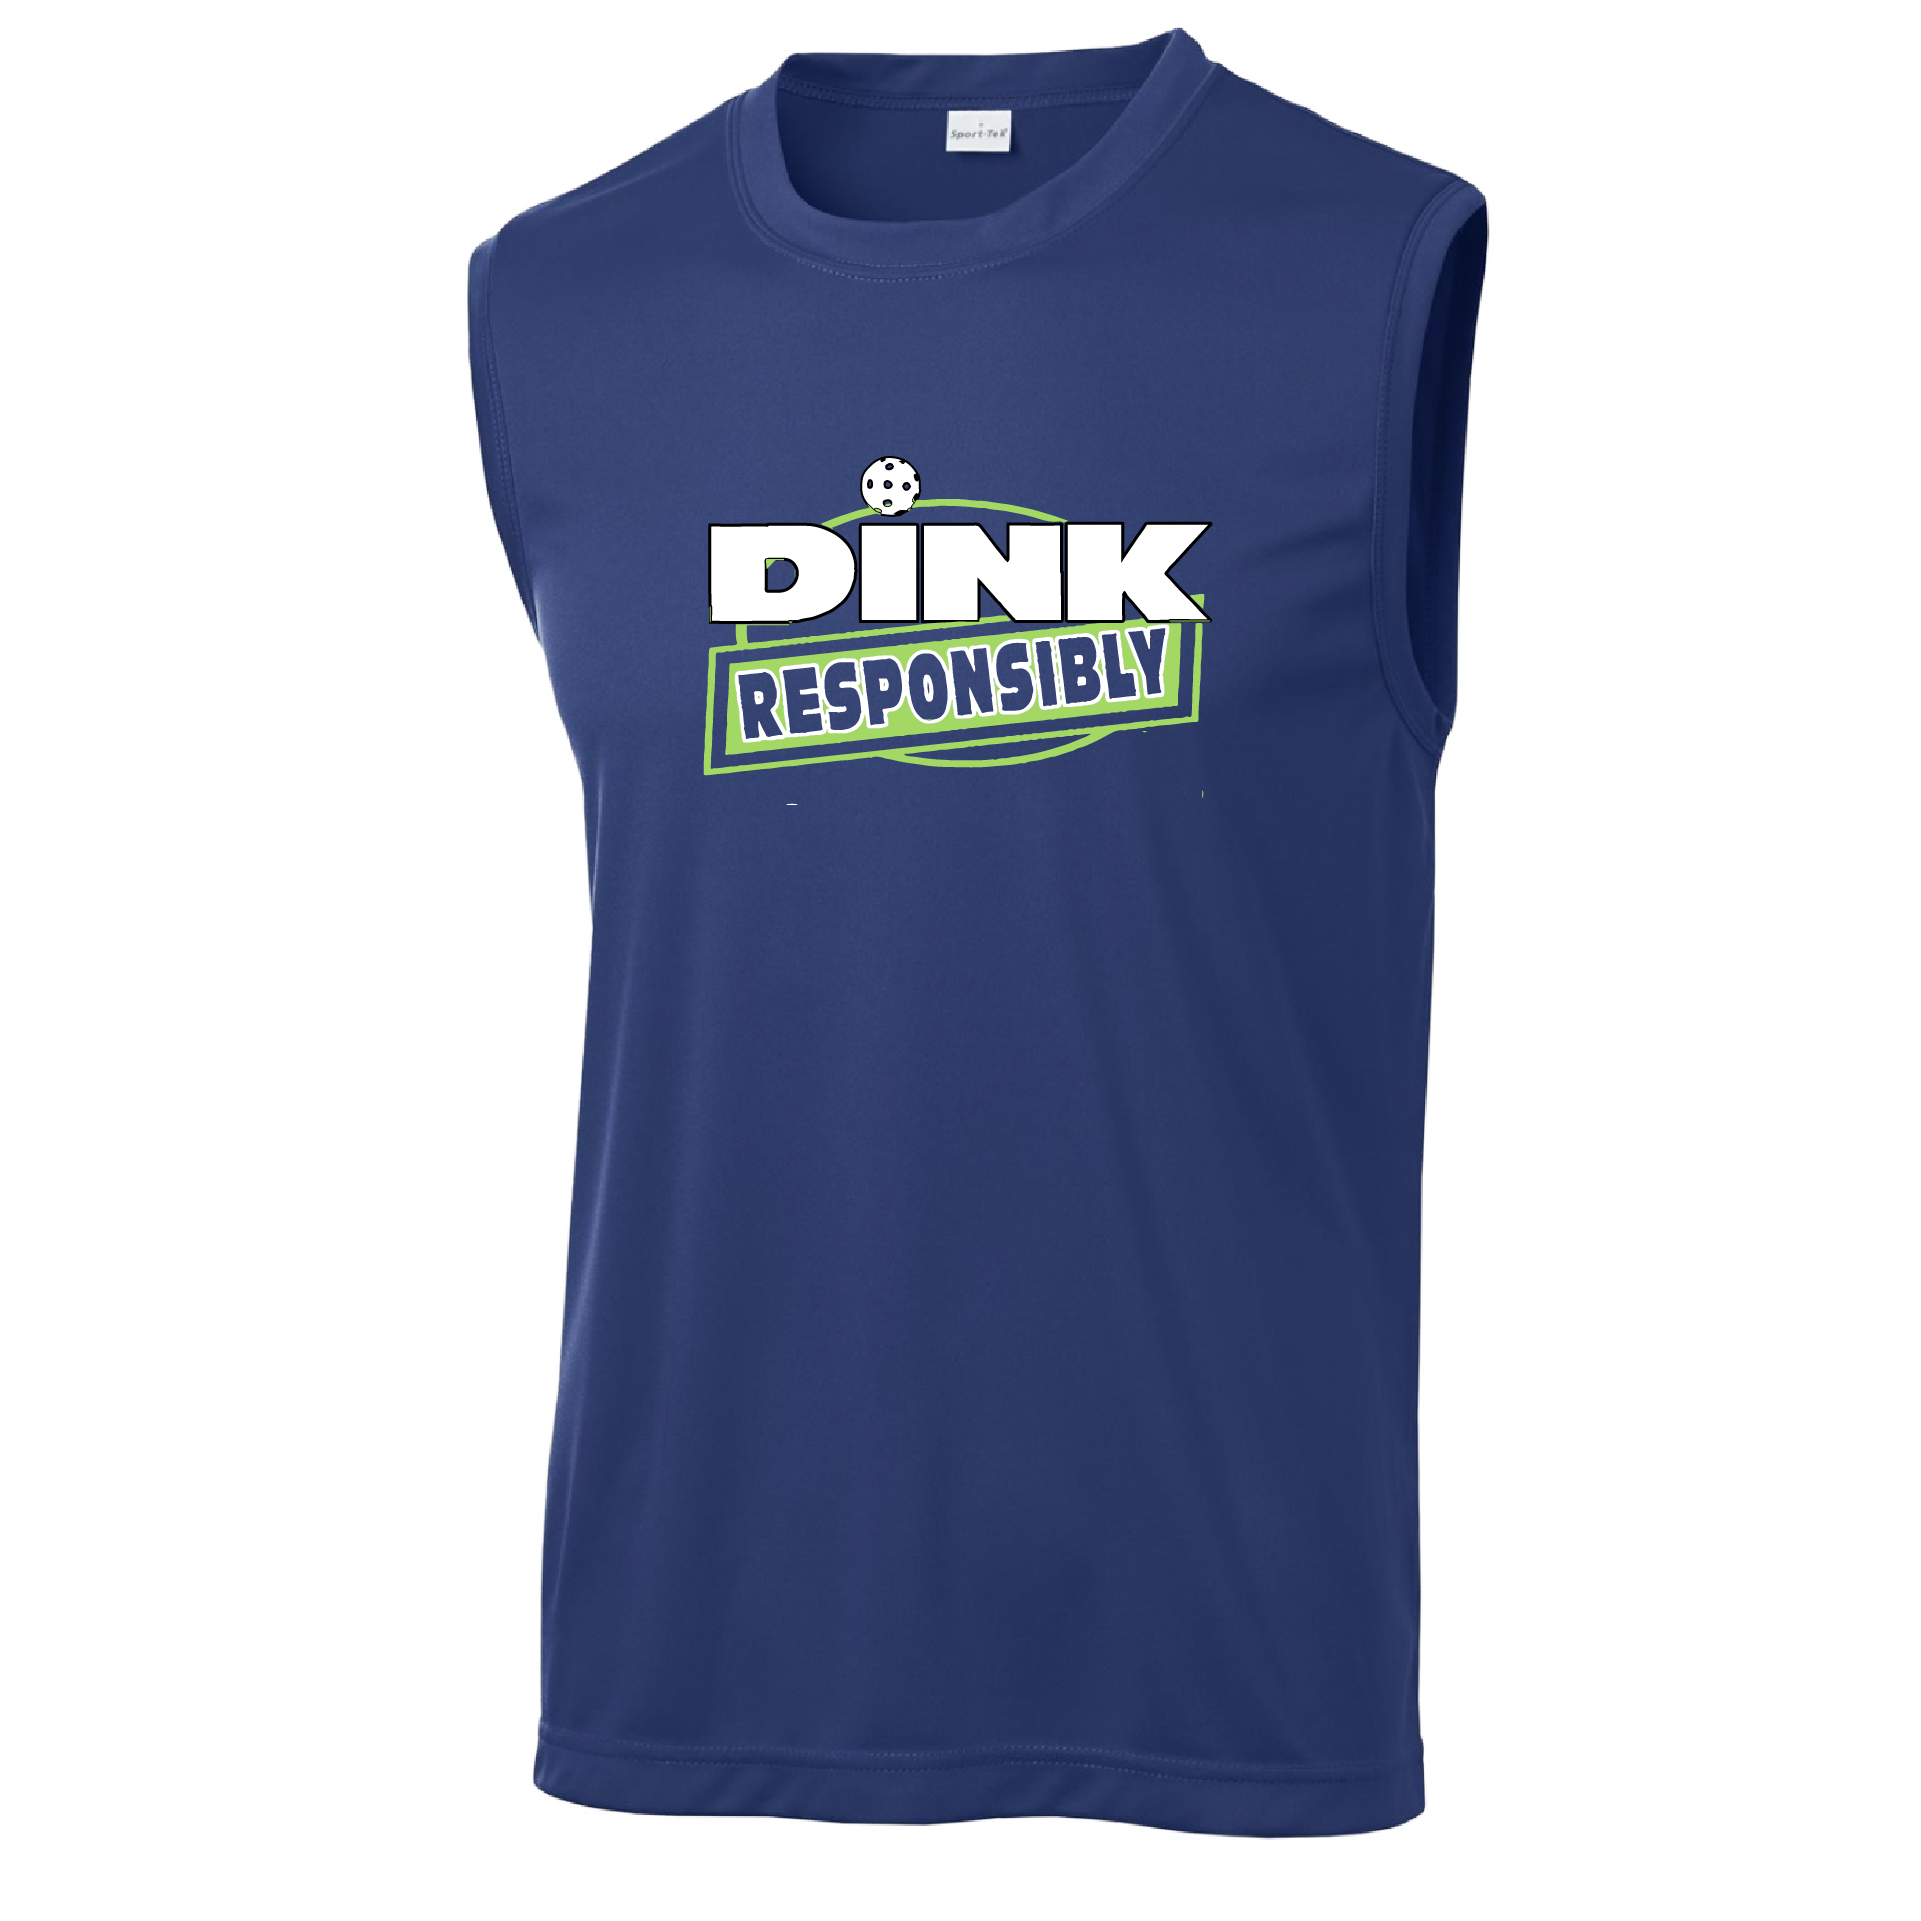 Pickleball Design: Dink Responsibly  Men's Styles: Sleeveless (SL)  Shirts are lightweight, roomy and highly breathable. These moisture-wicking shirts are designed for athletic performance. They feature PosiCharge technology to lock in color and prevent logos from fading. Removable tag and set-in sleeves for comfort.